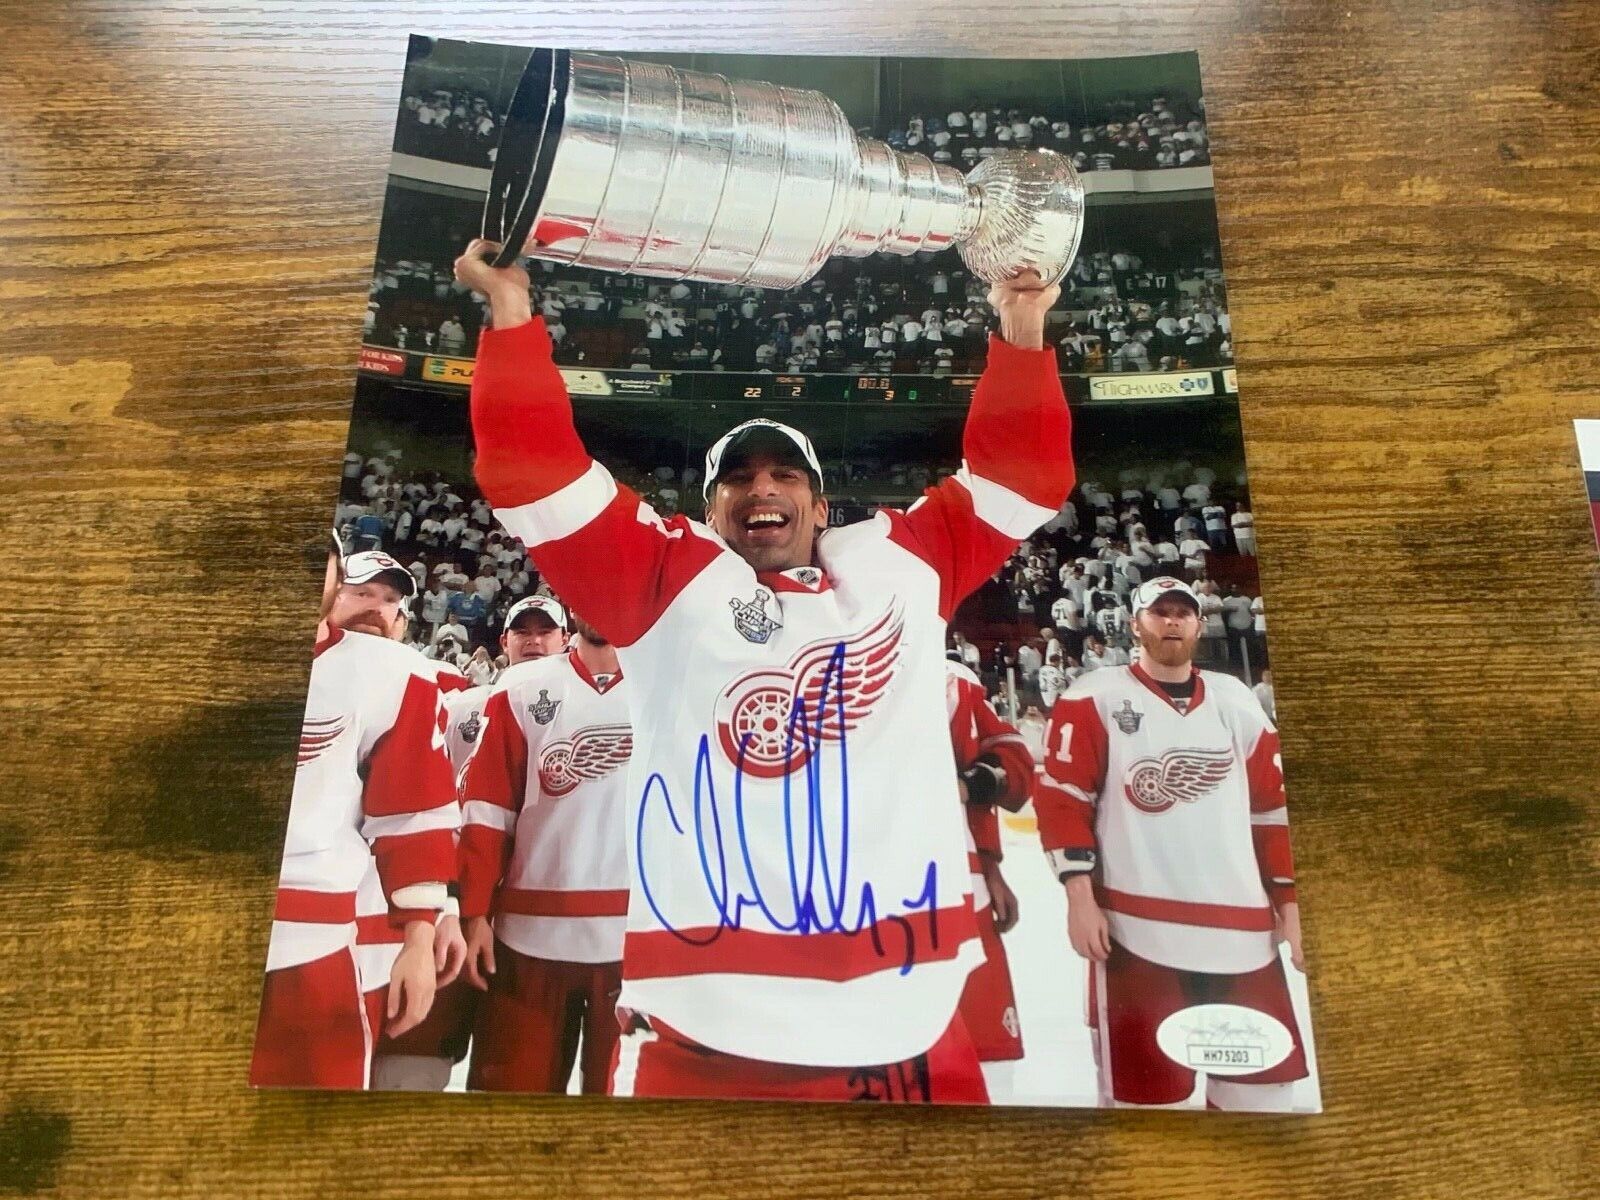 Chris Chelios Red Wings Stanley Cup Autographed 8x10 Photo JSA COA HH75203